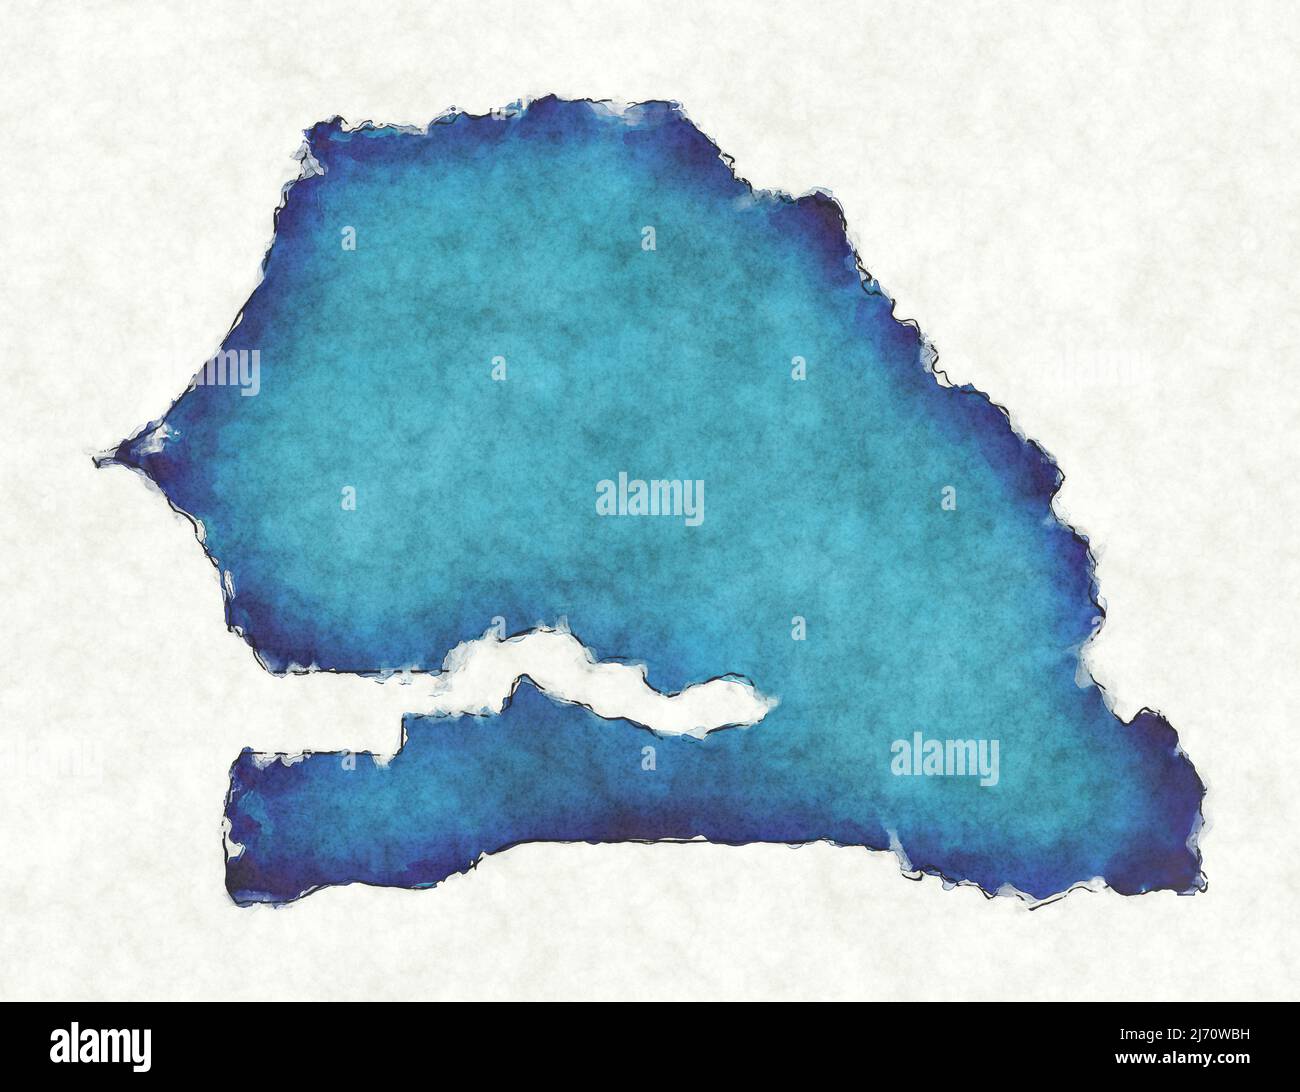 Senegal map with drawn lines and blue watercolor illustration Stock Photo